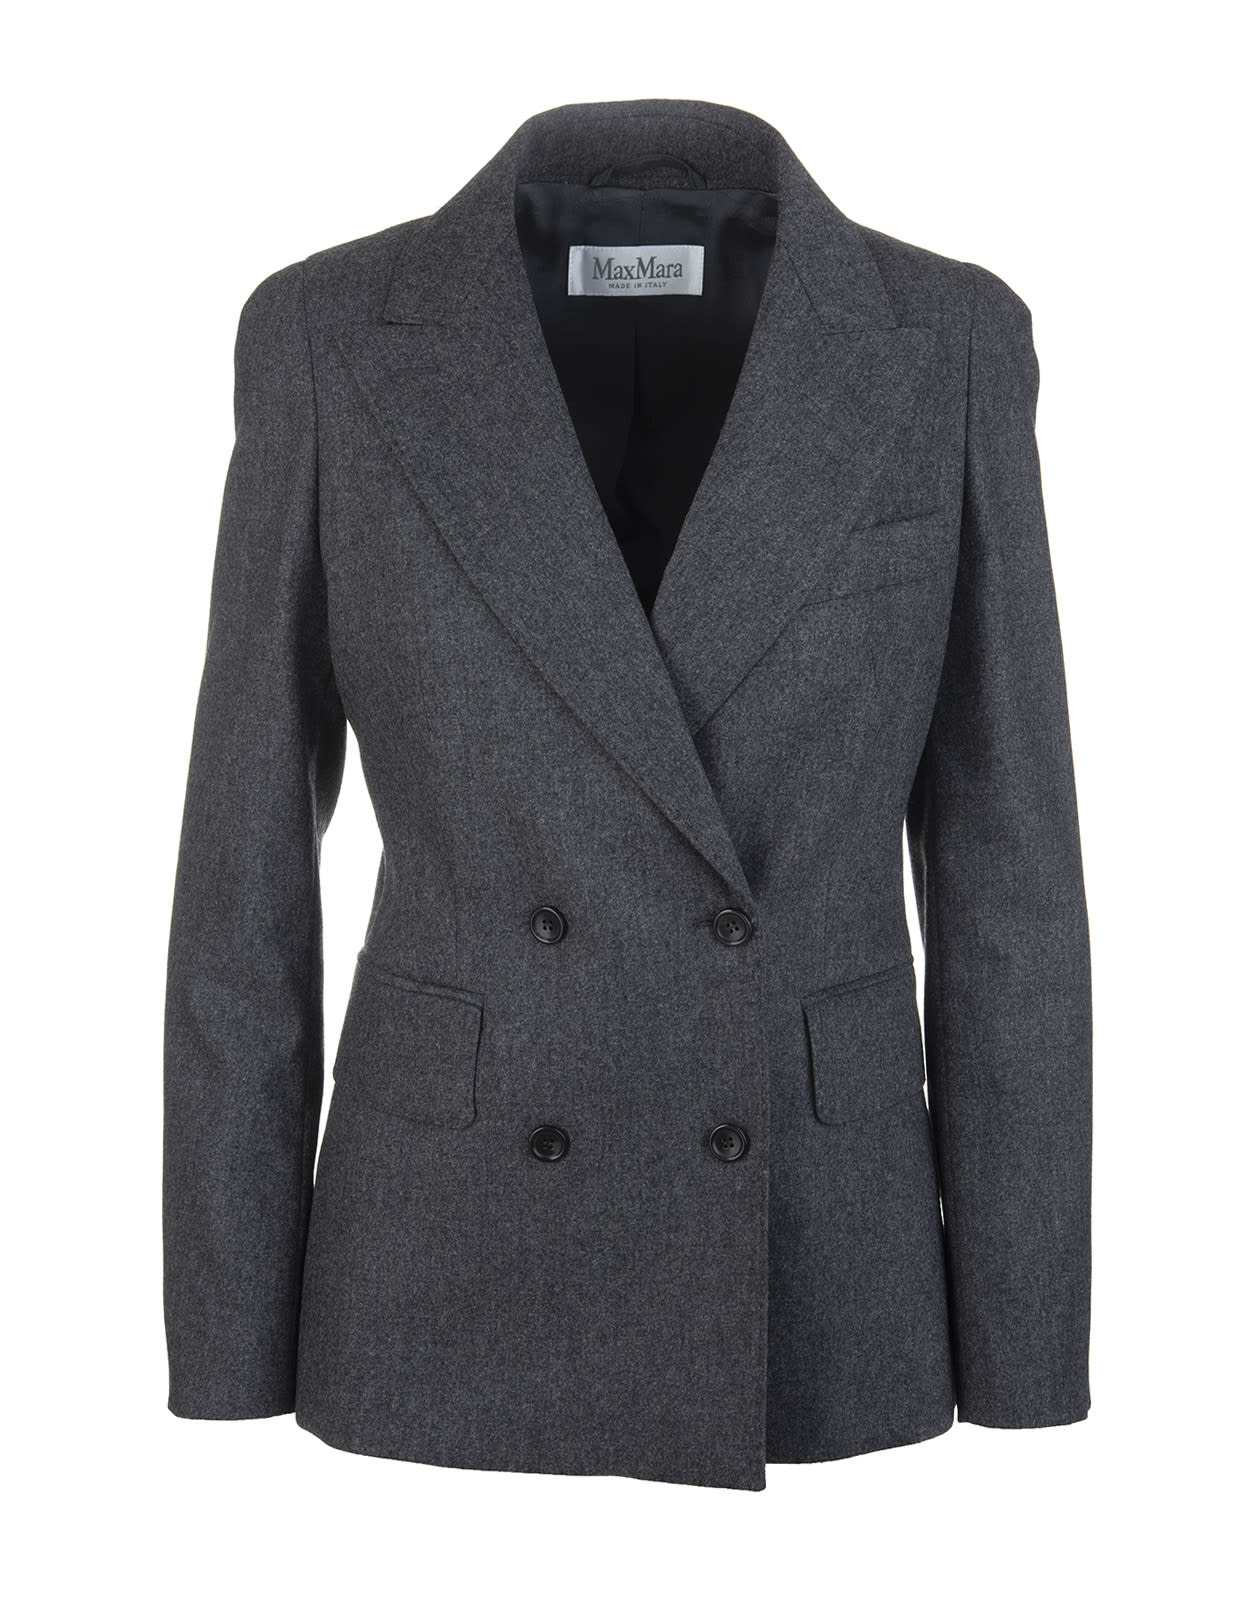 Photo of  Max Mara Arad Jacket In Grey Flannel Wool And Cashmere- shop Max Mara jackets online sales